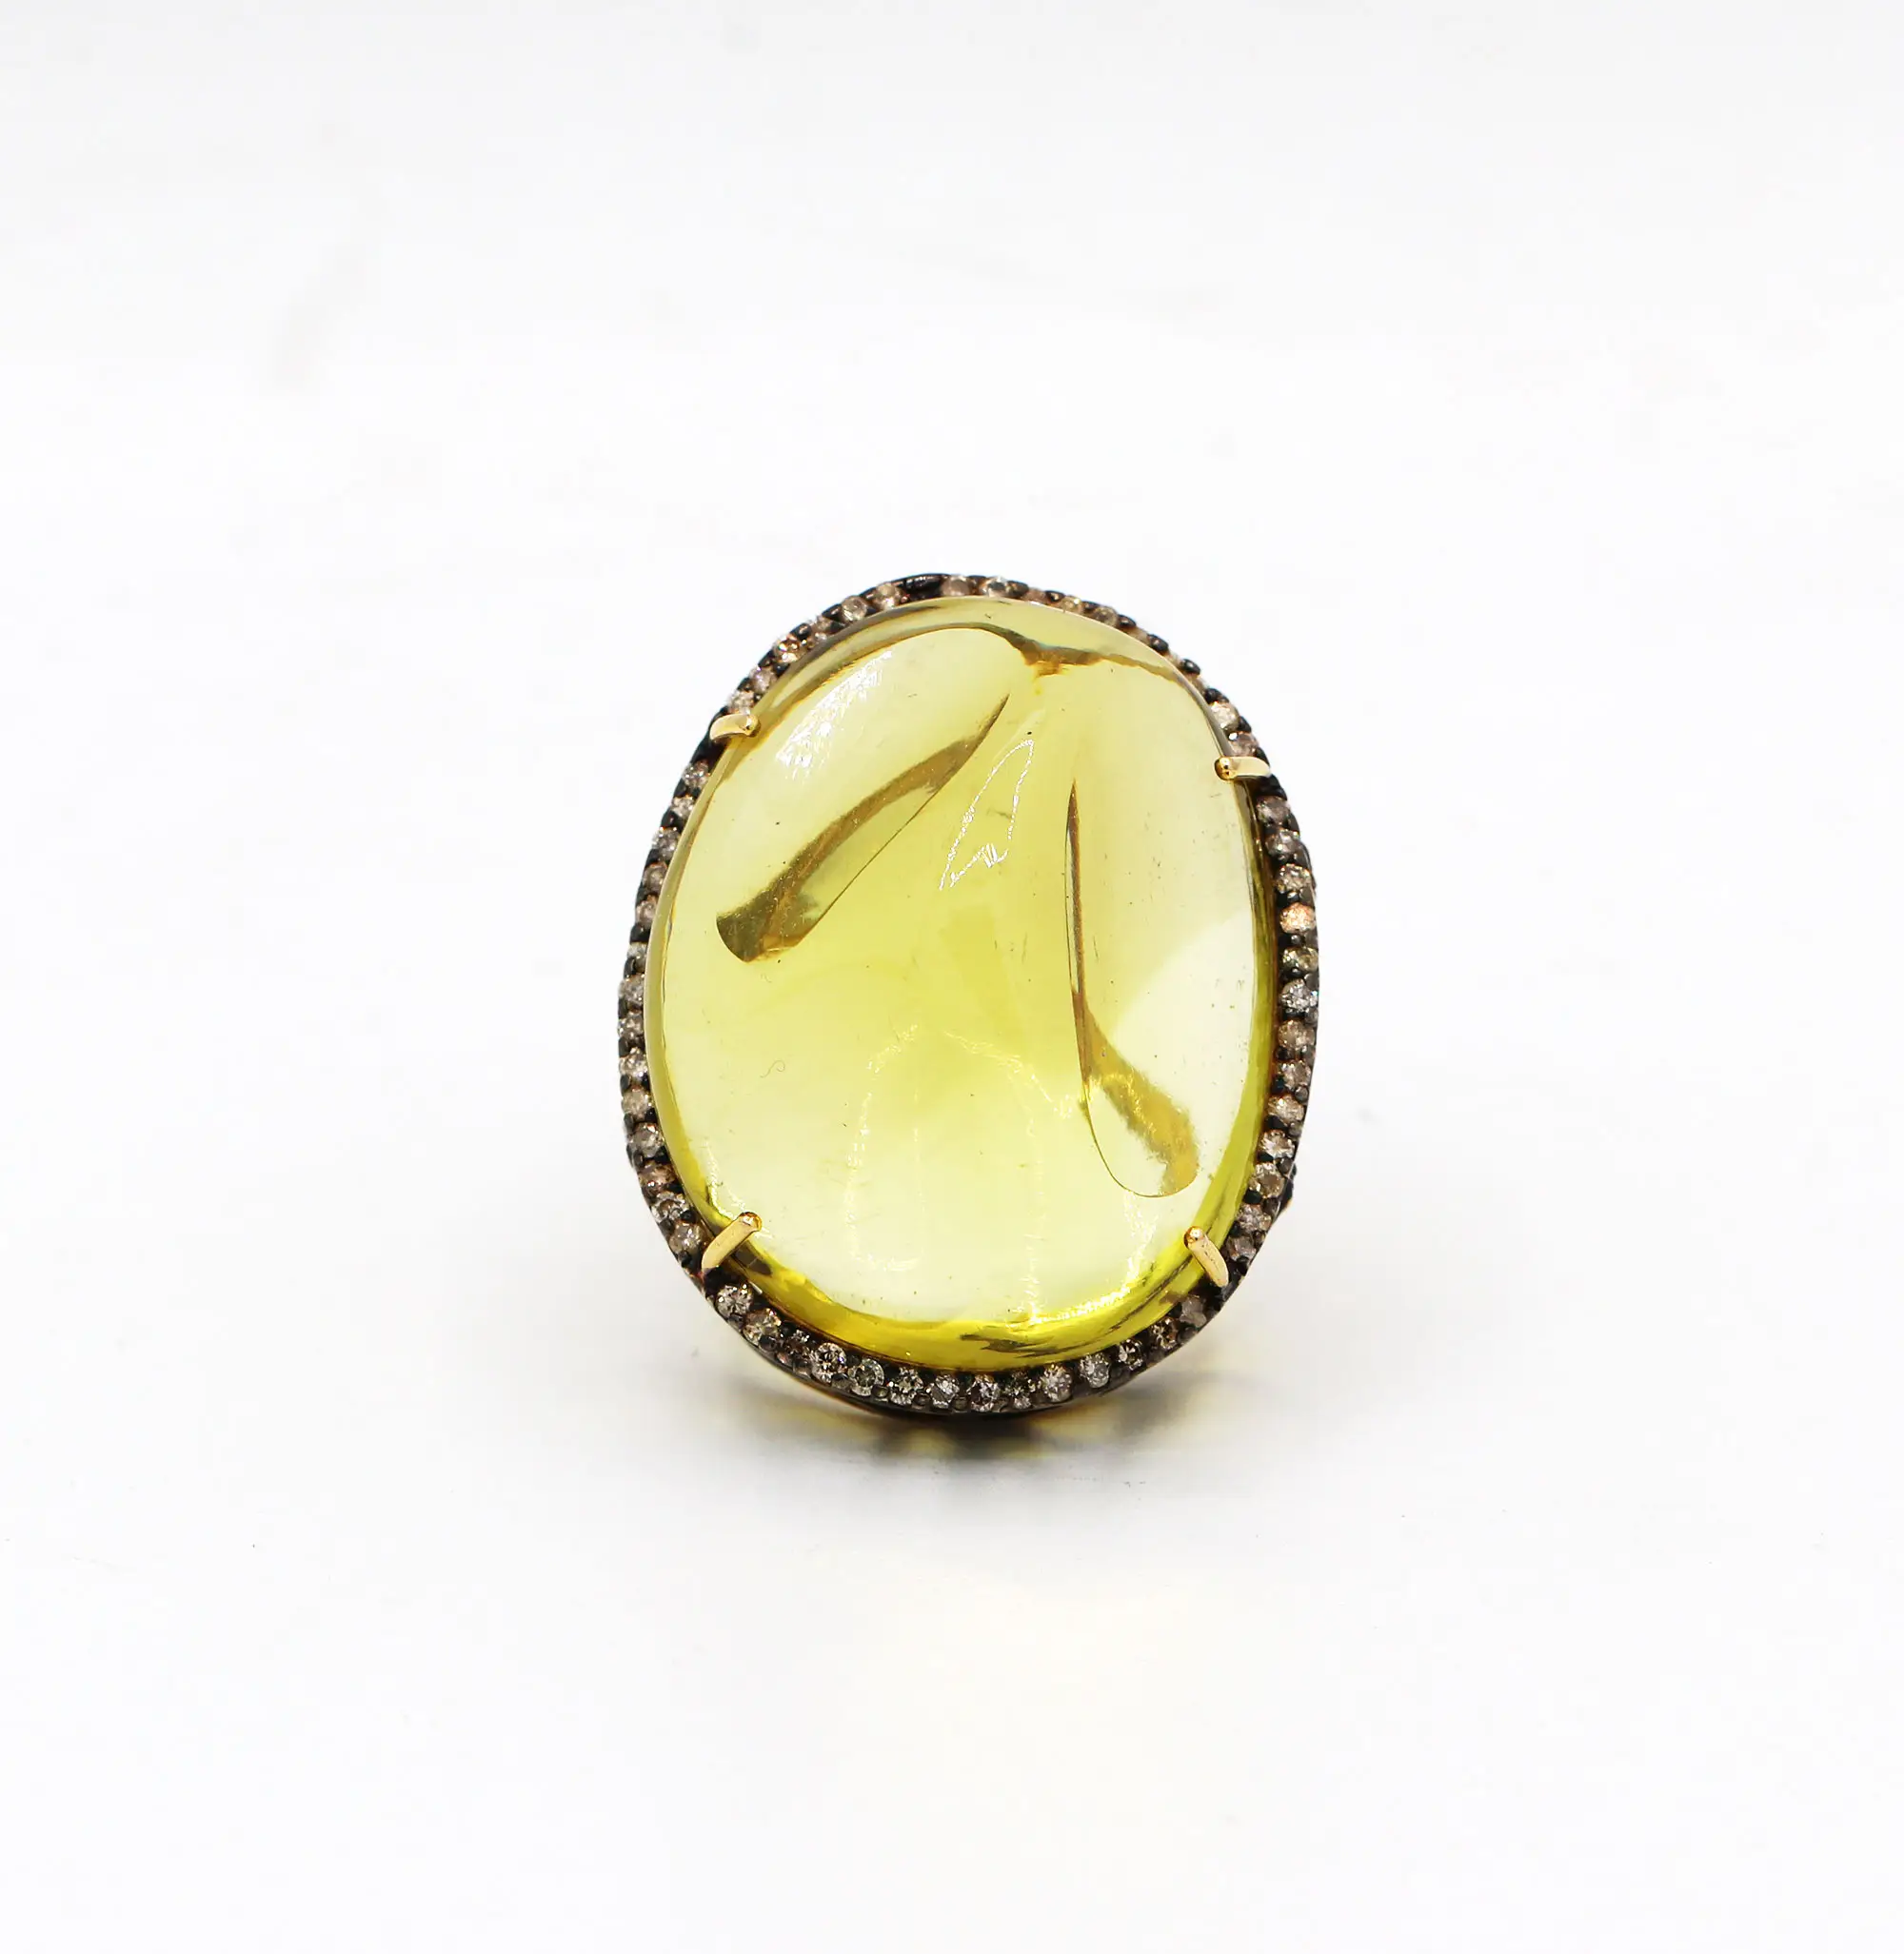 High Quality Lemon Quartz And Diamond Gemstone 925 Solid Sterling Silver Handmade Victorian Ring Jewelry For Wholesale